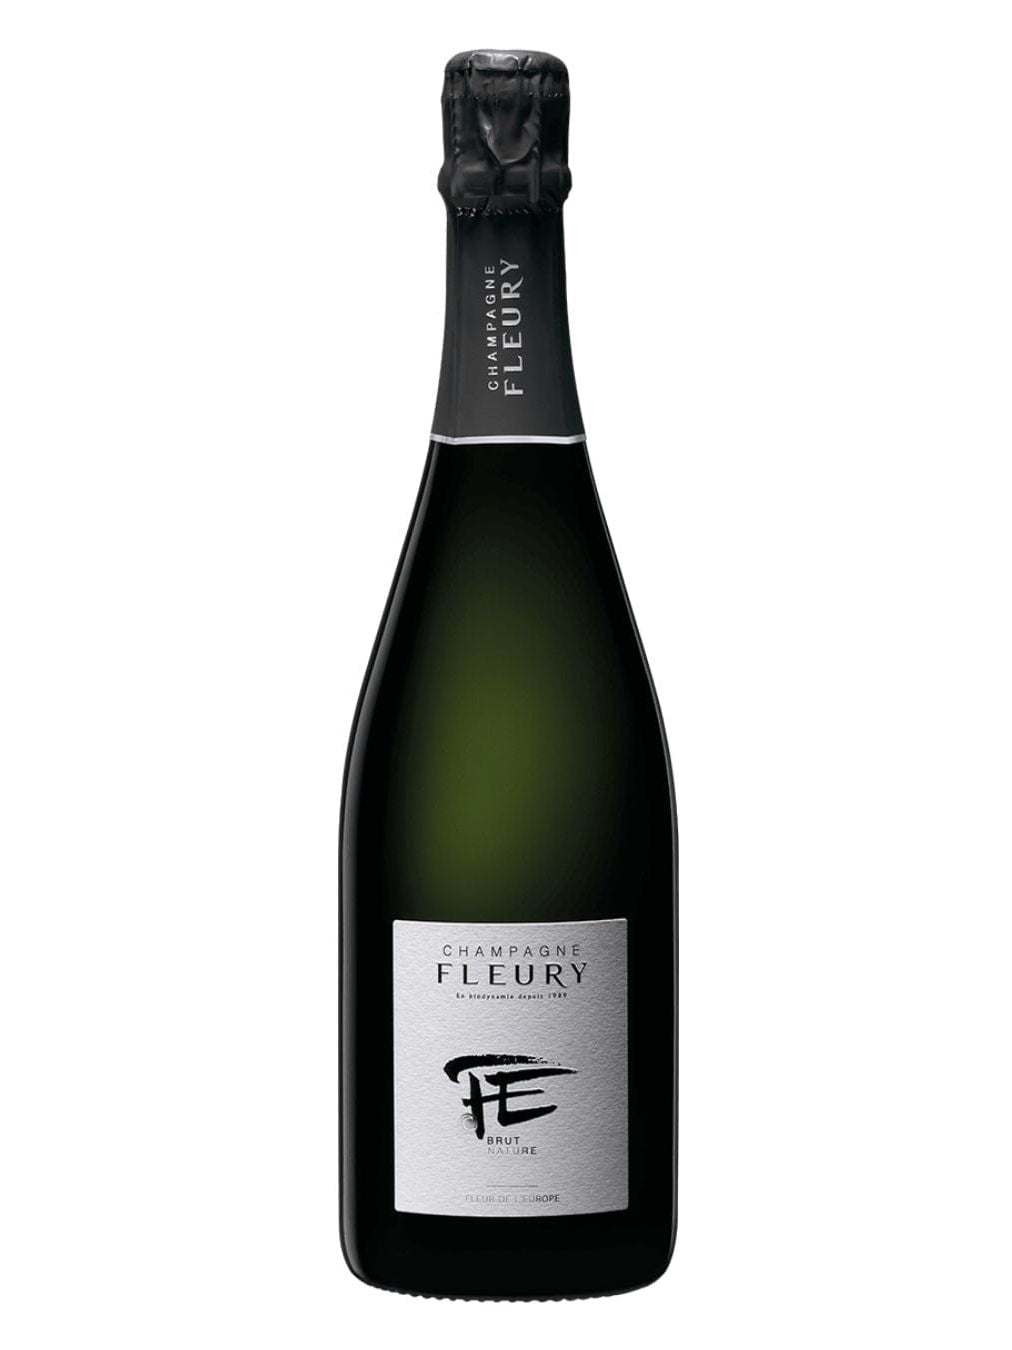 Shop Champagne Fleury Champagne Fleury Fleur de l'Europe Brut Nature NV online at PENTICTON artisanal French wine store in Hong Kong. Discover other French wines, promotions, workshops and featured offers at pentictonpacific.com 